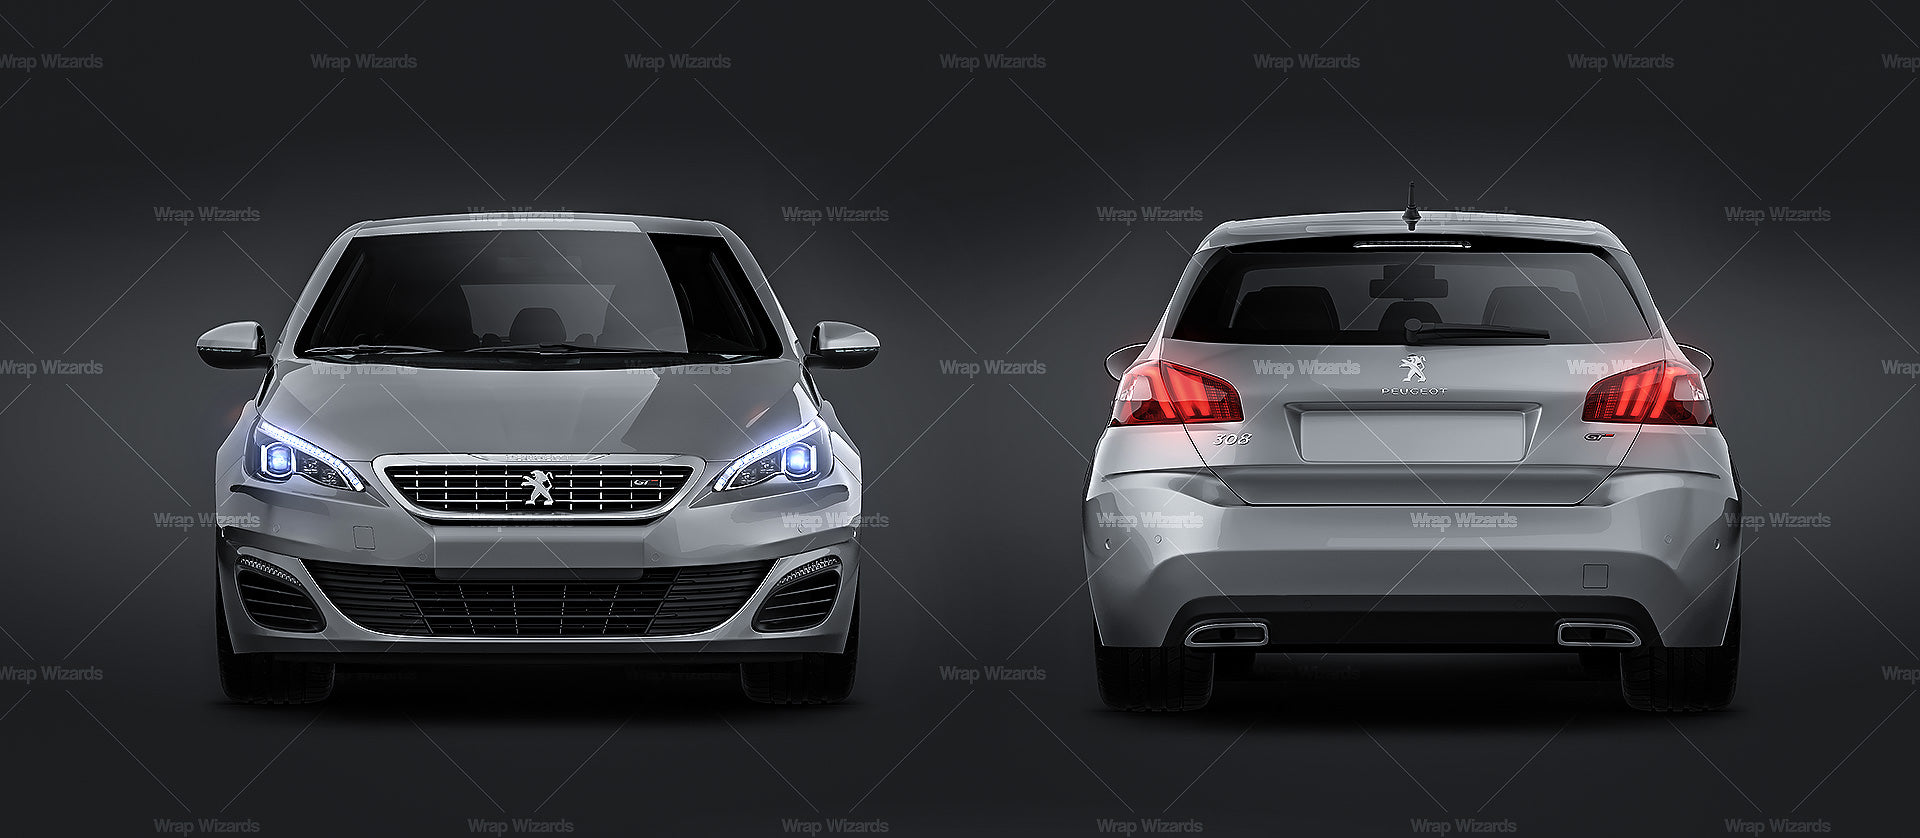 Peugeot 308 GT 2017 glossy finish - all sides Car Mockup Template.psd